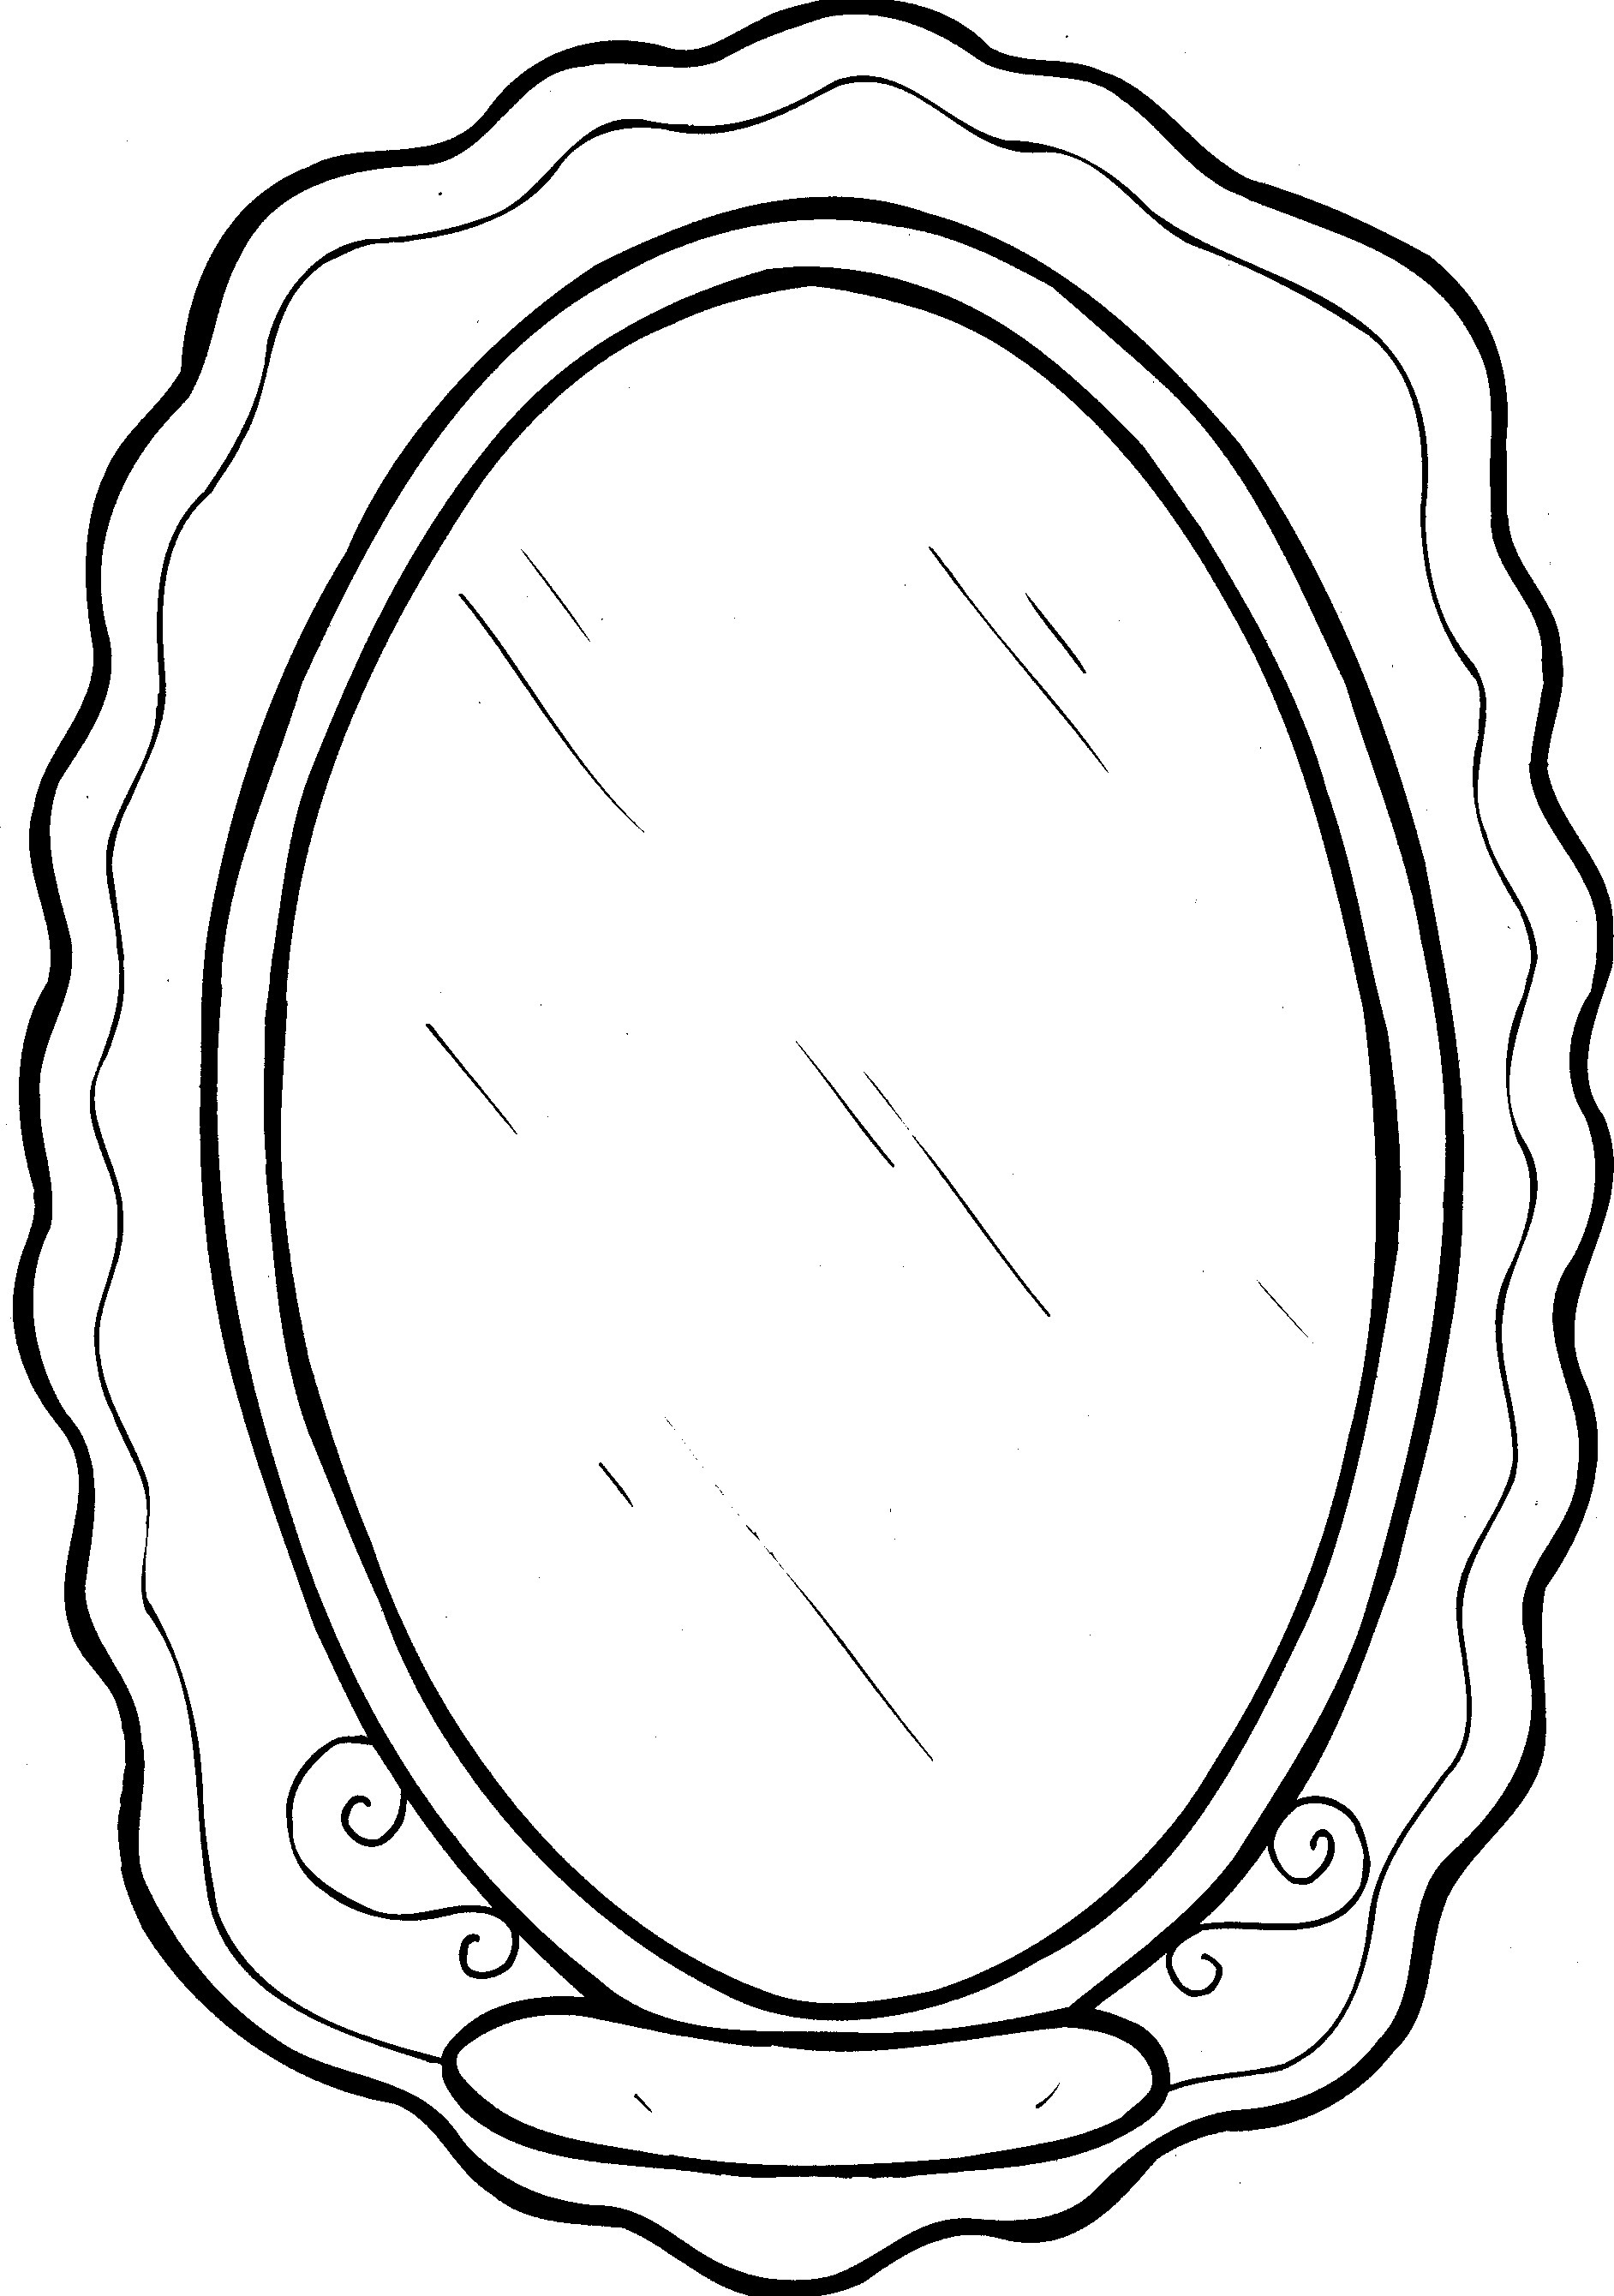 Mirror coloring pages to download and print for free